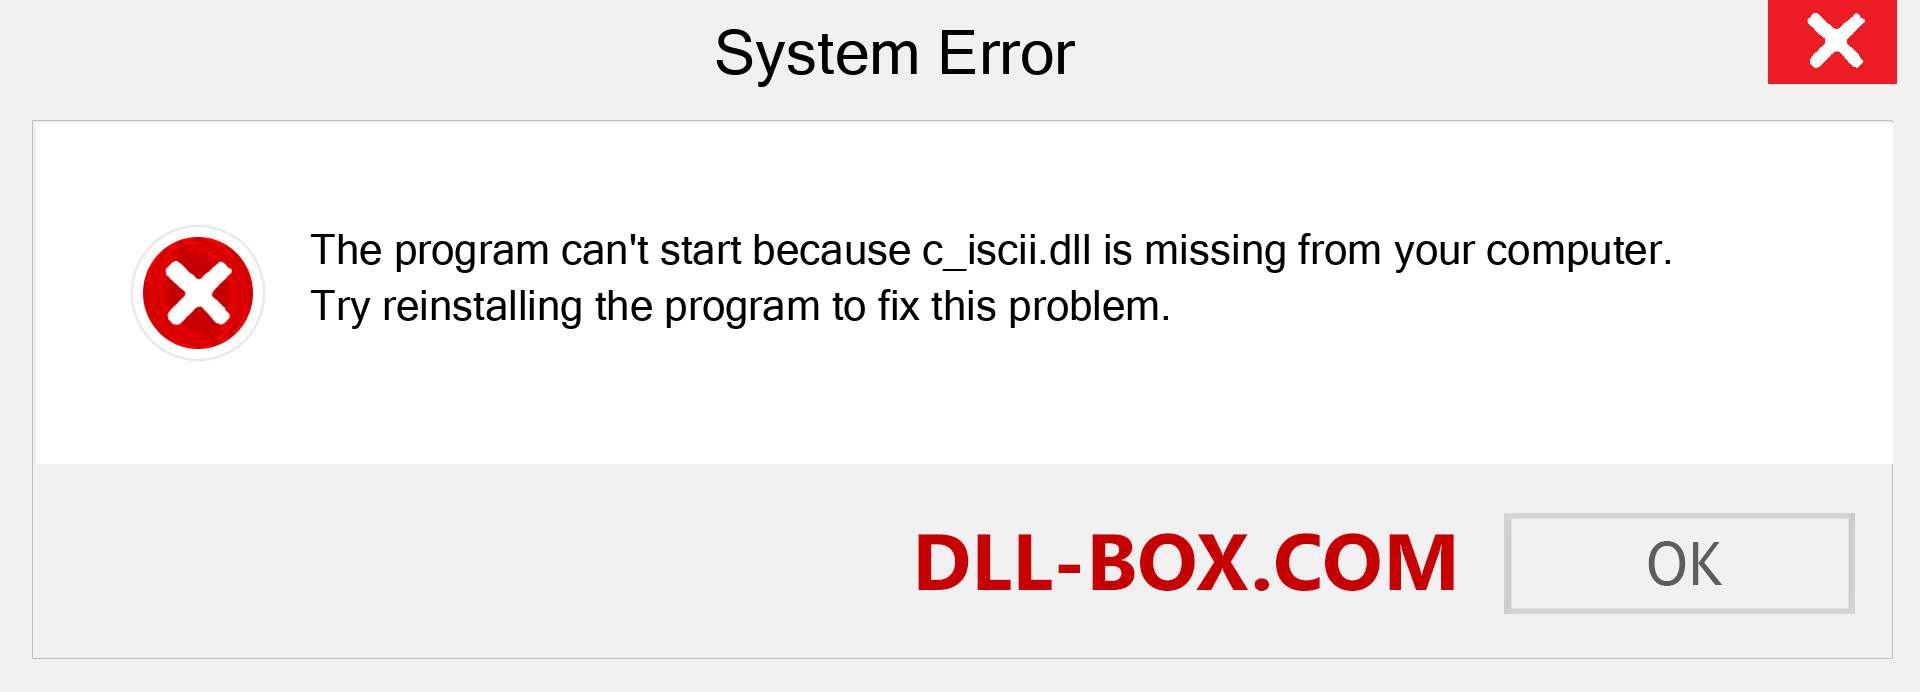  c_iscii.dll file is missing?. Download for Windows 7, 8, 10 - Fix  c_iscii dll Missing Error on Windows, photos, images